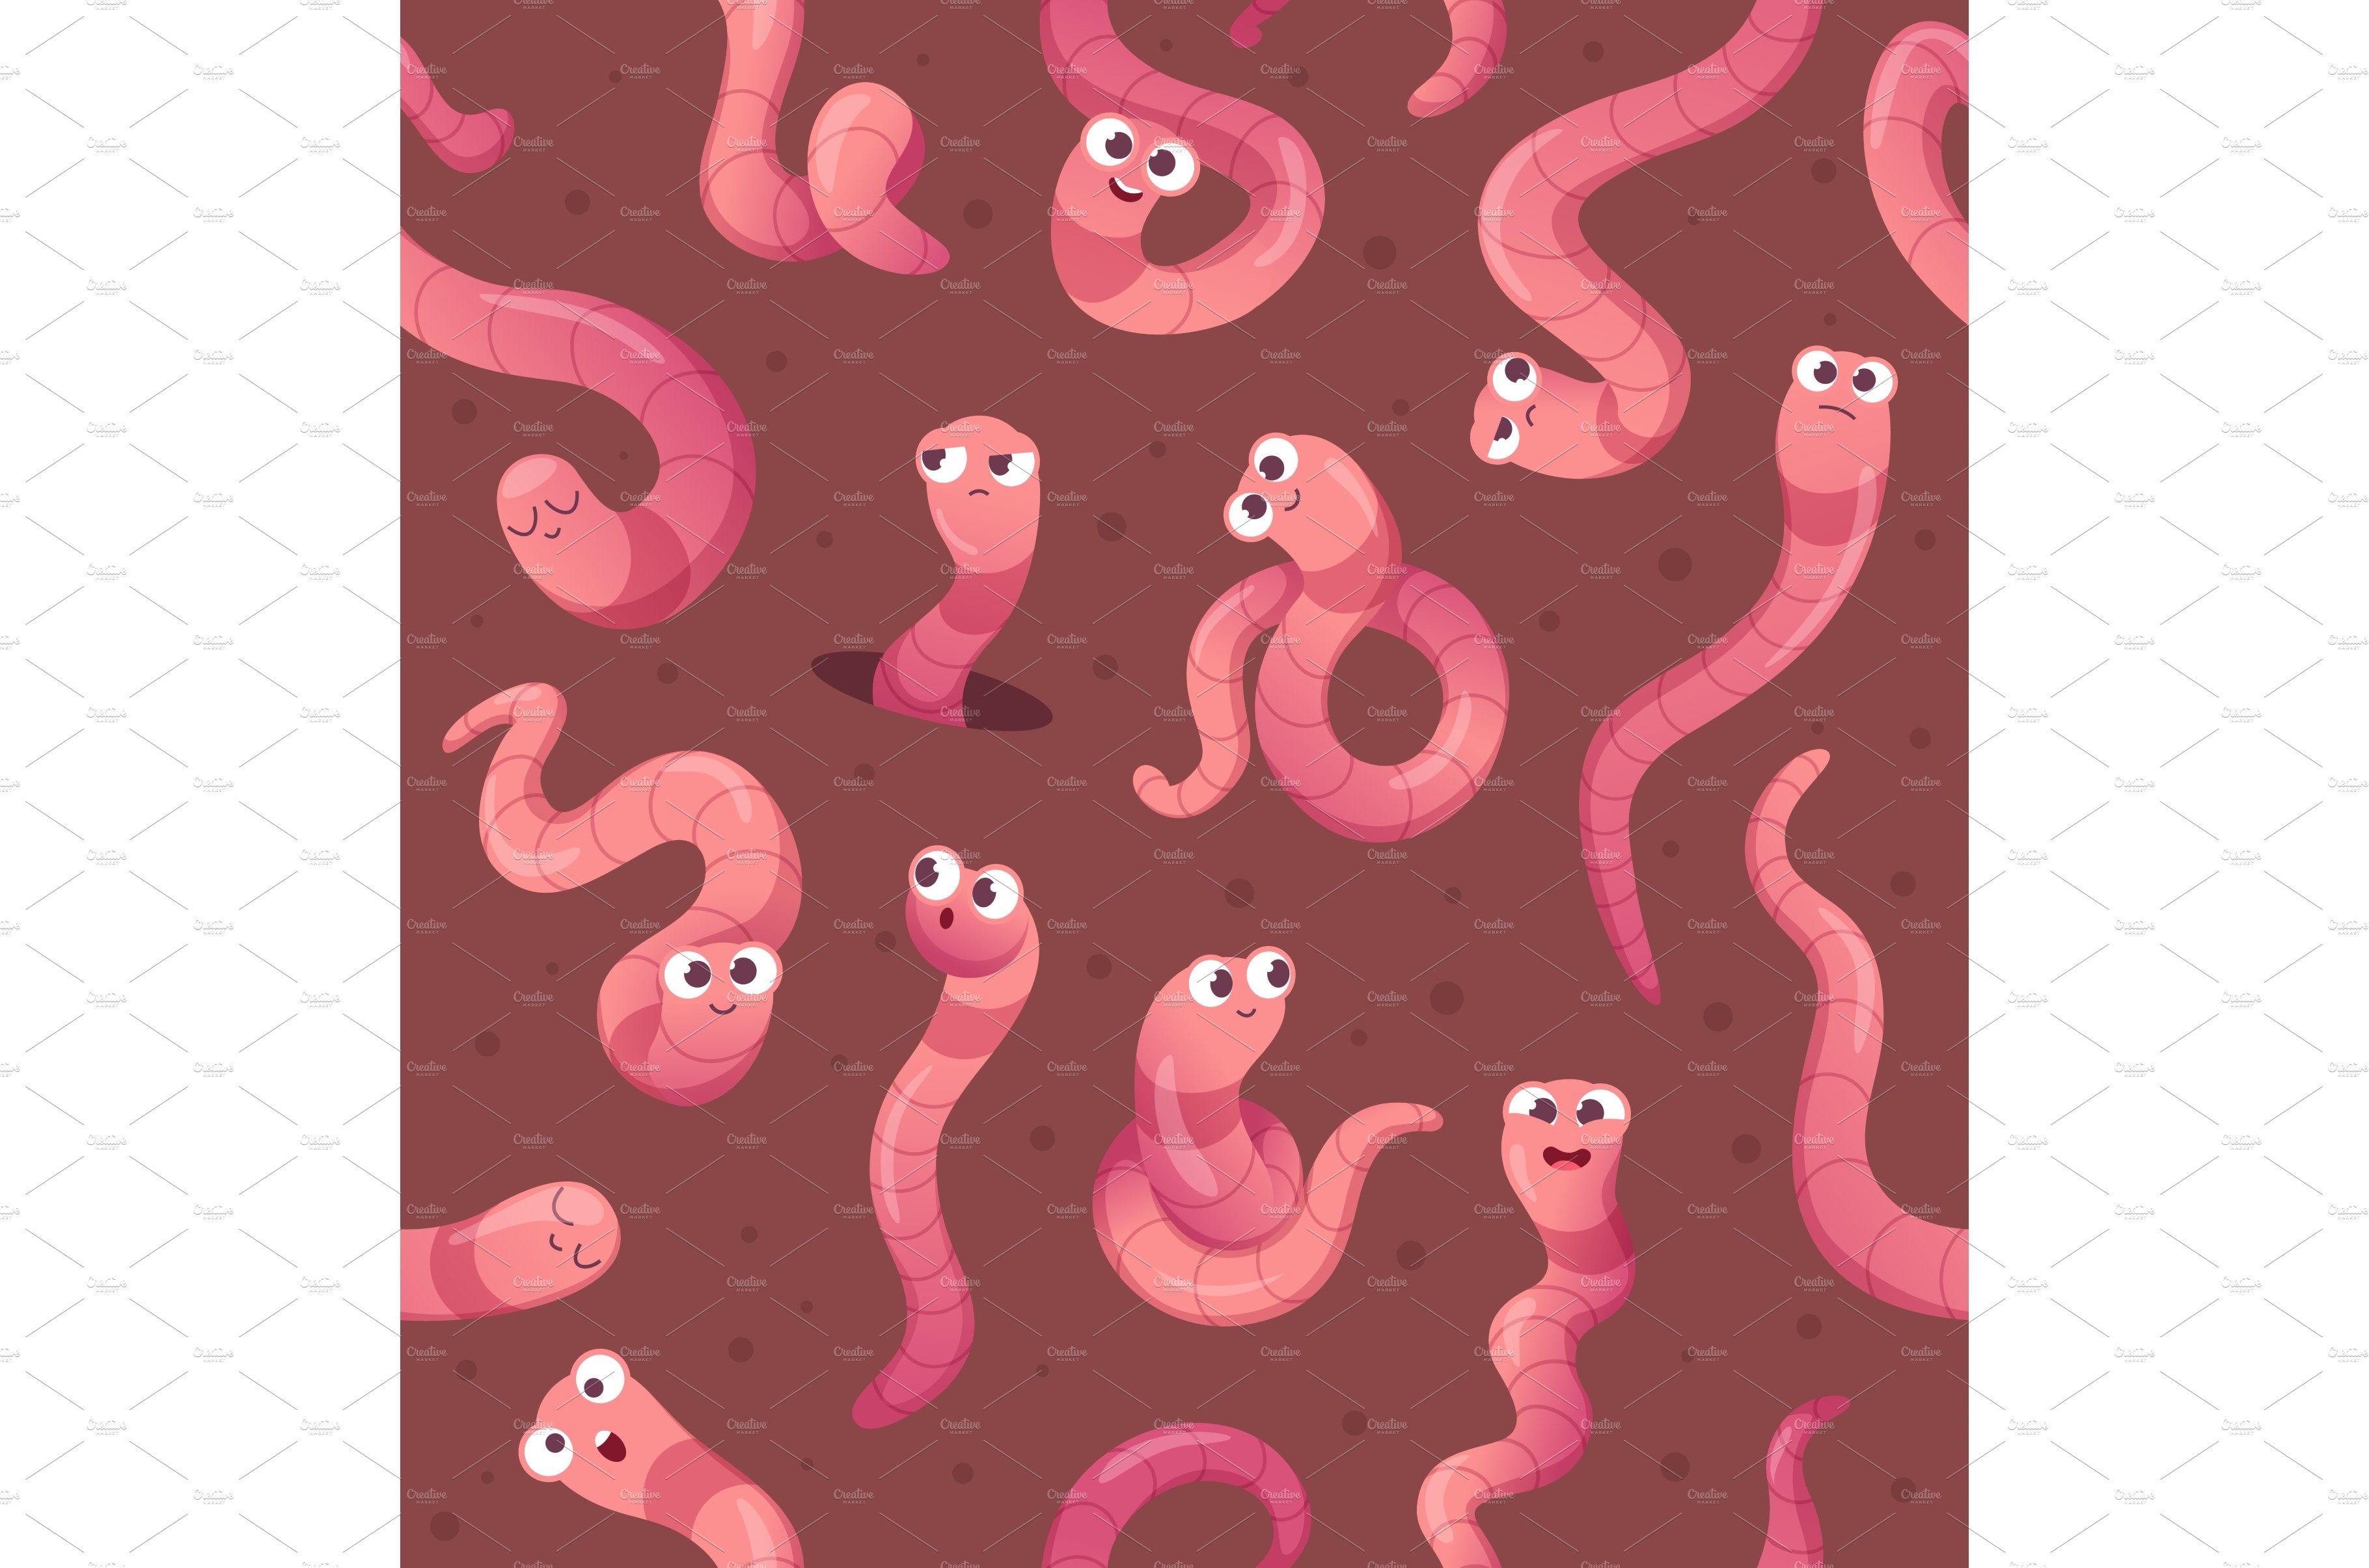 Worms pattern. Crawlers in action cover image.